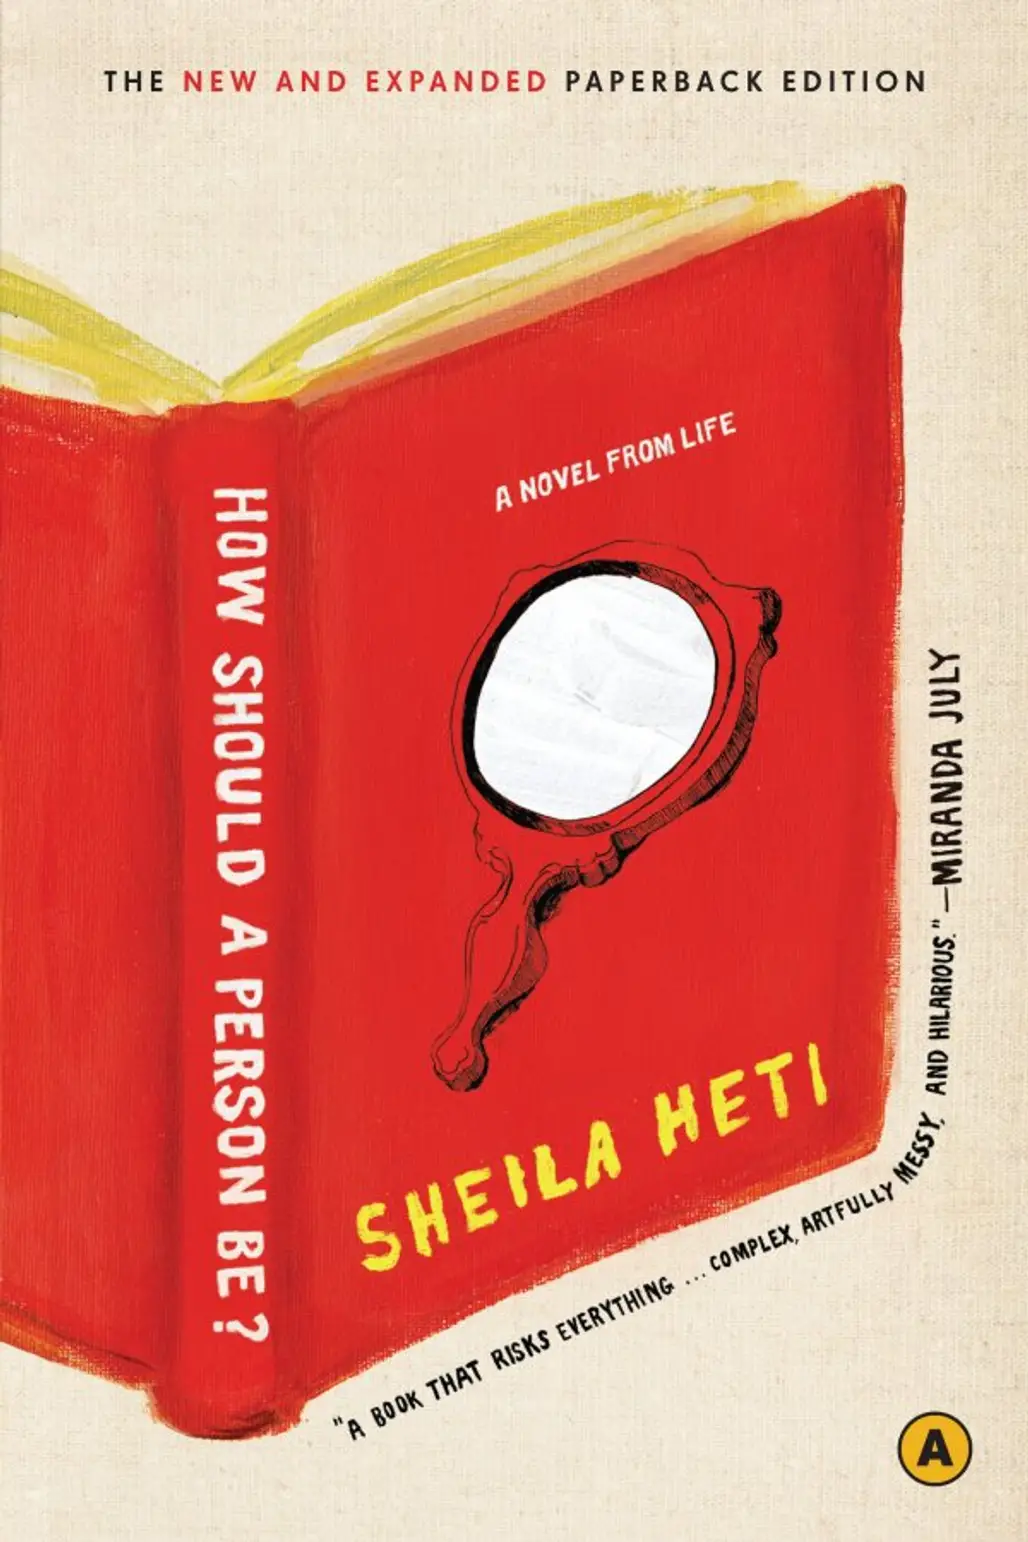 How Should a Person Be? by Sheila Heti